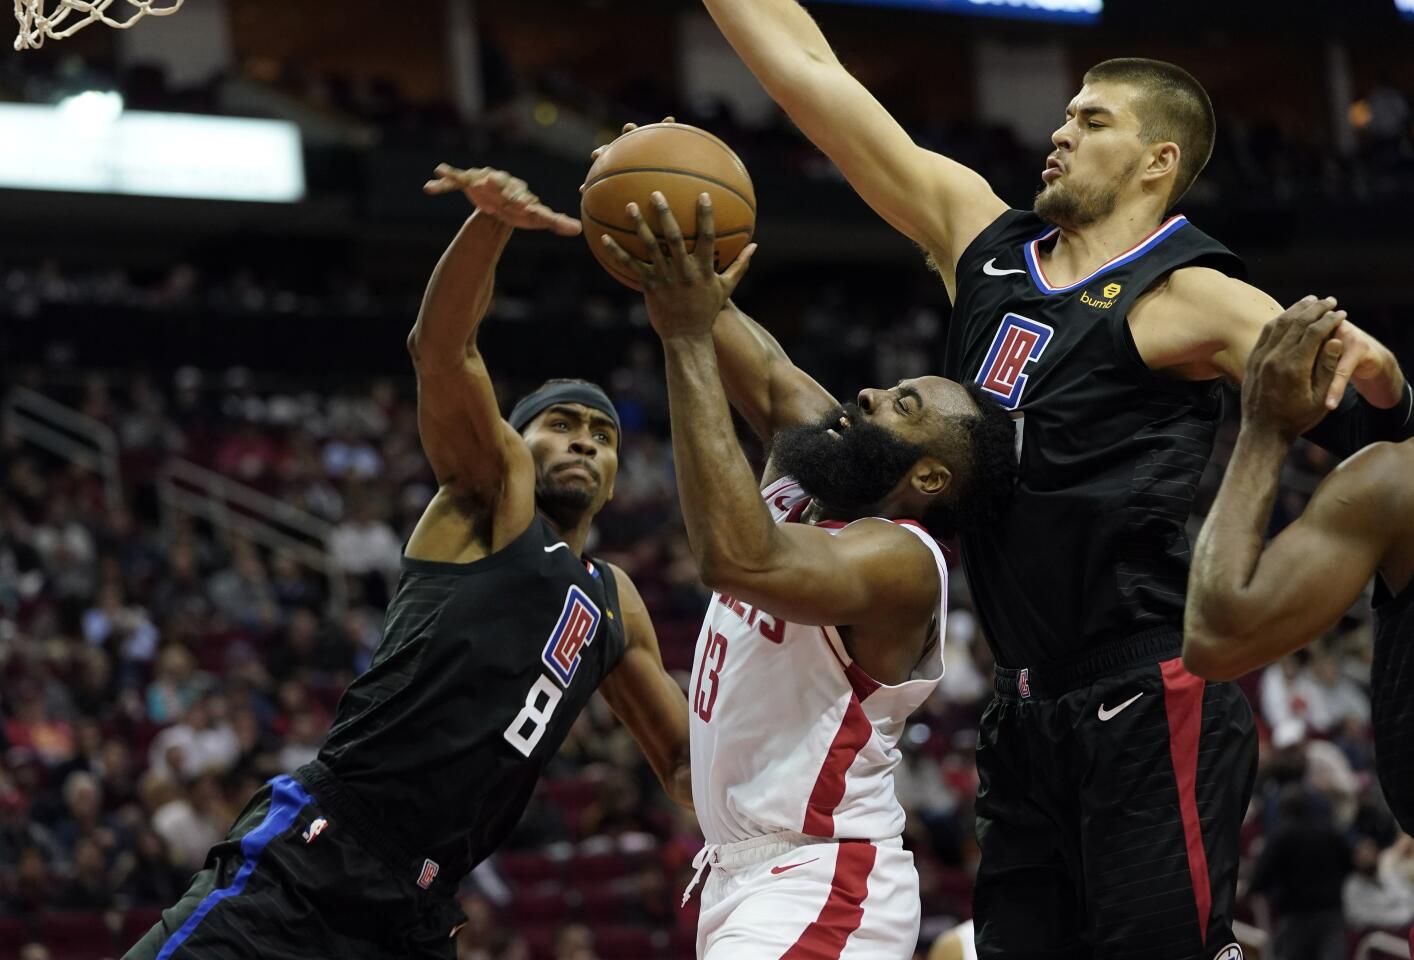 Rockets guard James Harden (13) goes up for a shot against Clippers Maurice Harkless (8) and Ivica Zubac during the second half of a game Nov. 13.